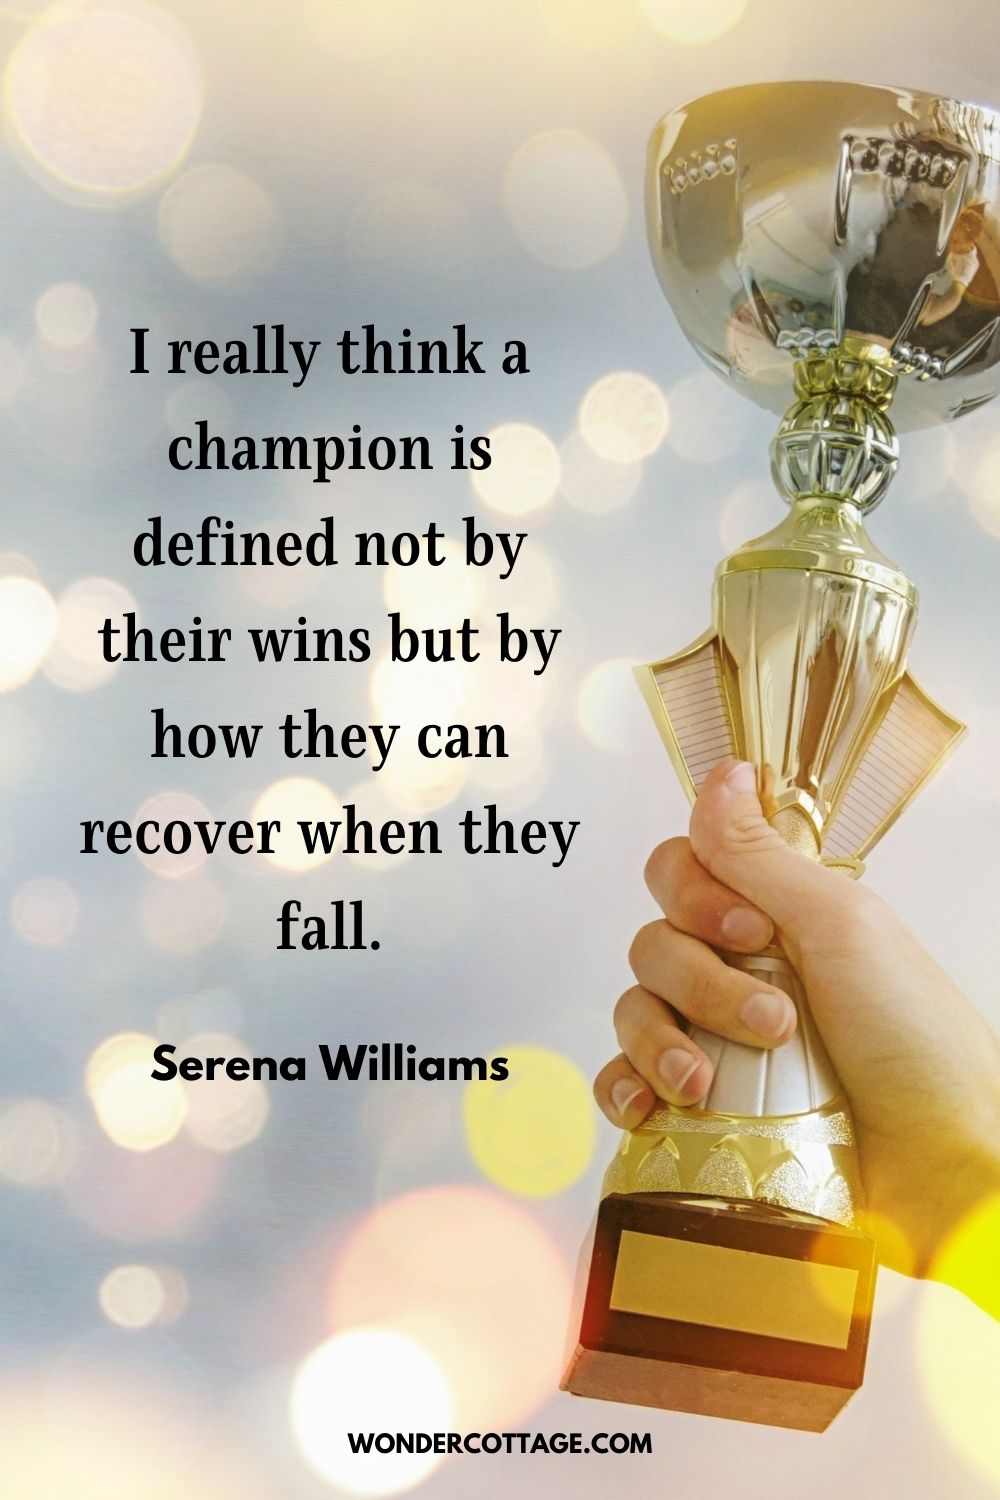 I really think a champion is defined not by their wins but by how they can recover when they fall. Serena Williams